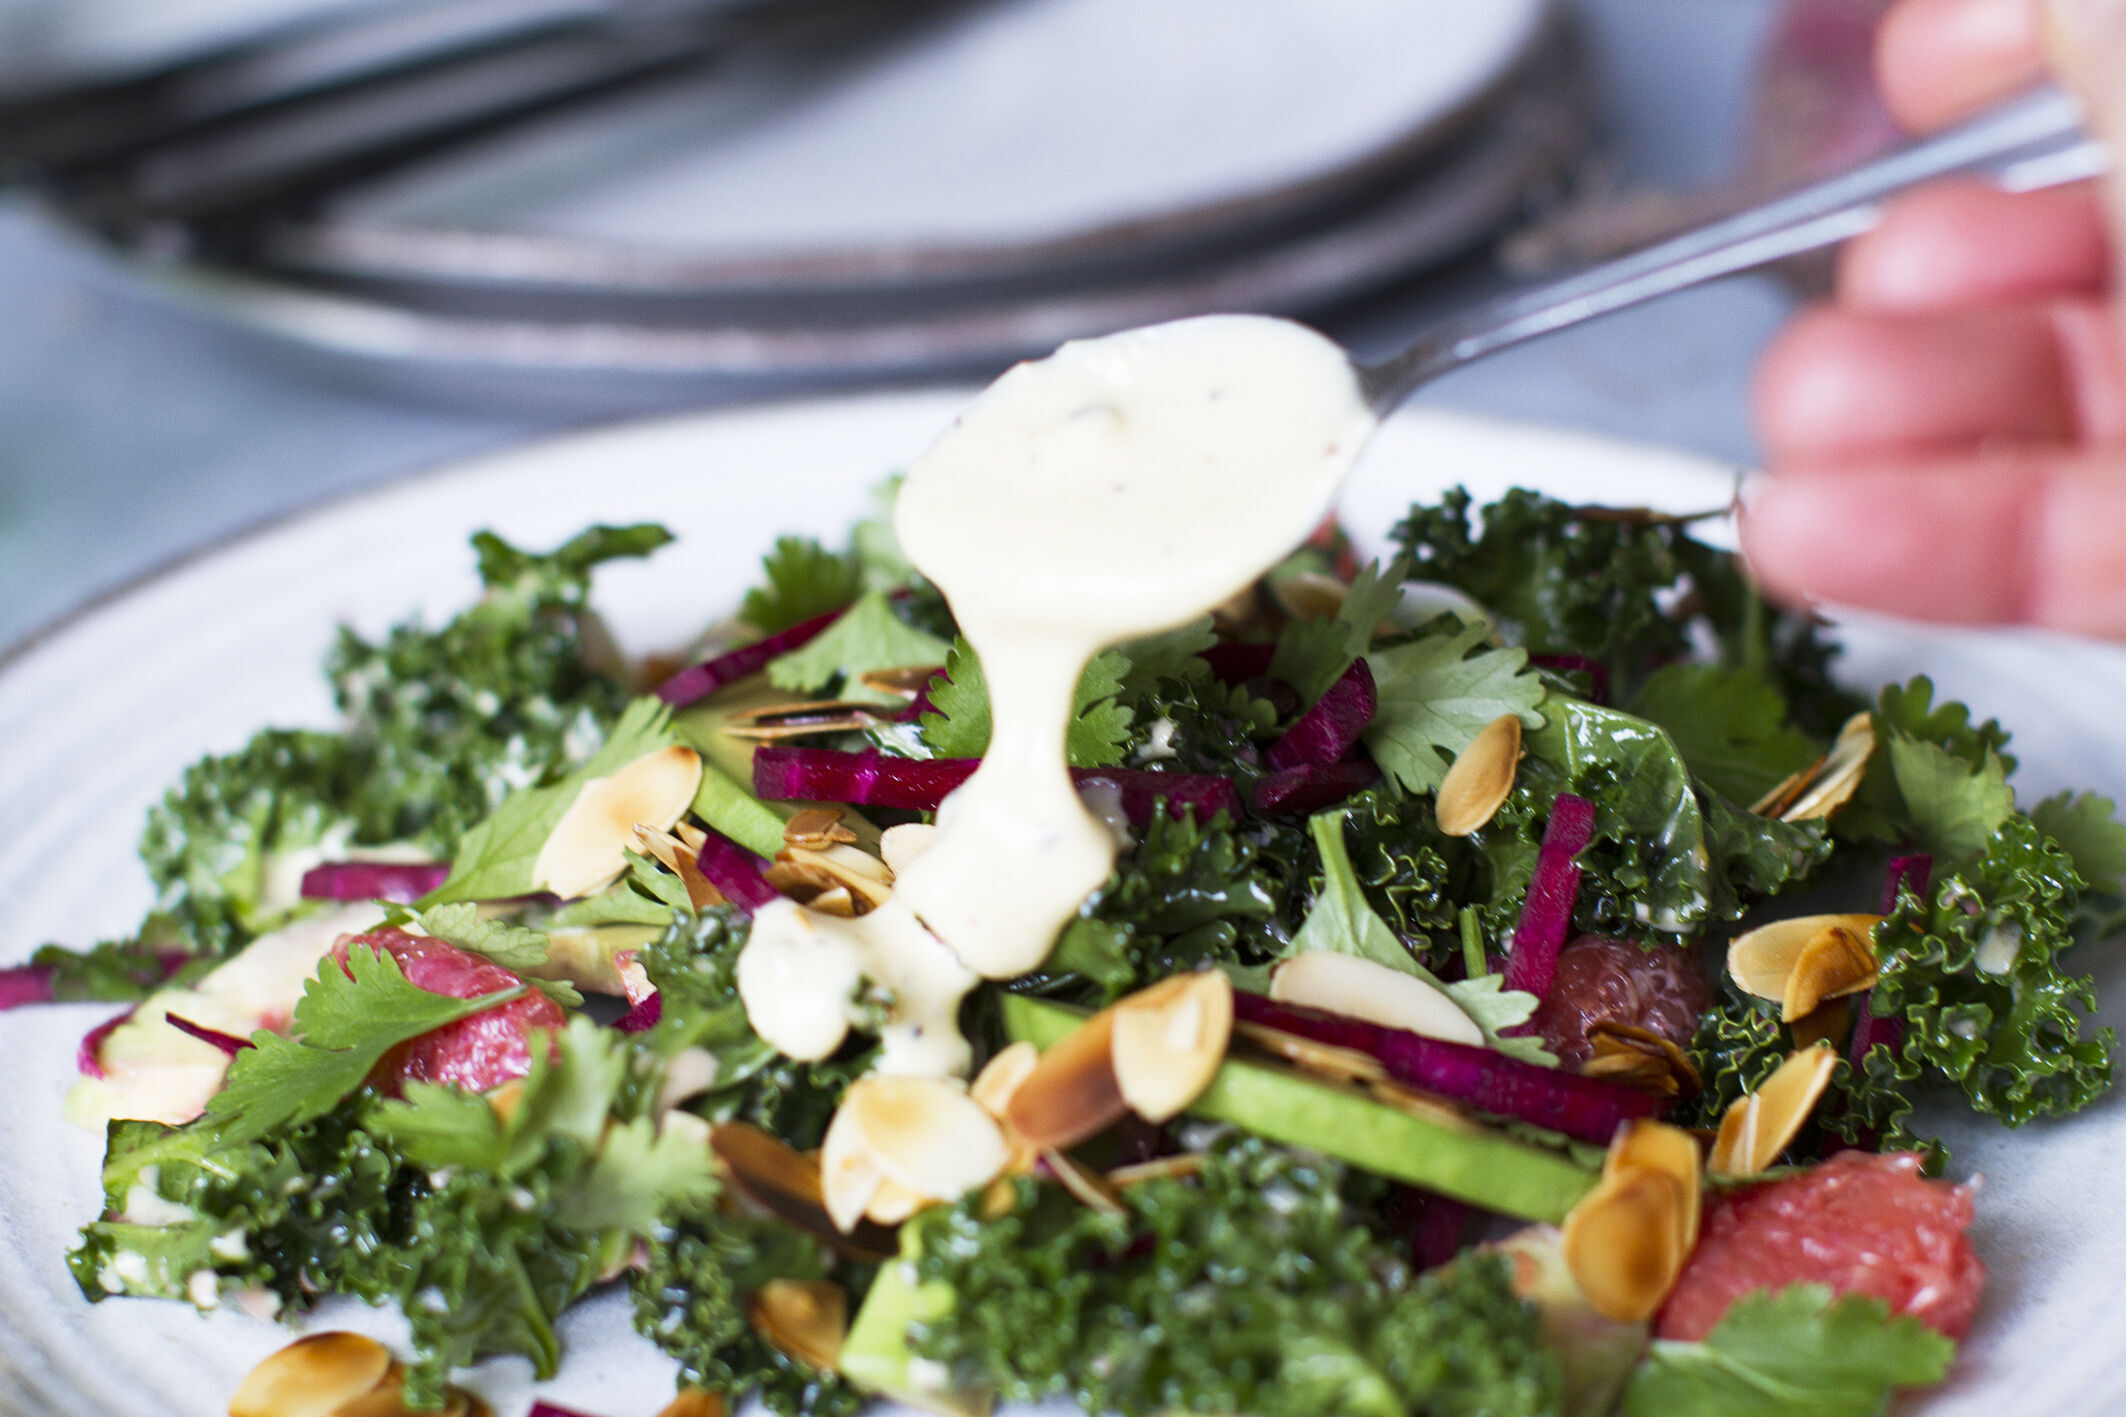 Working from home? Treat yourself to this delicious superfood salad with umami dressing